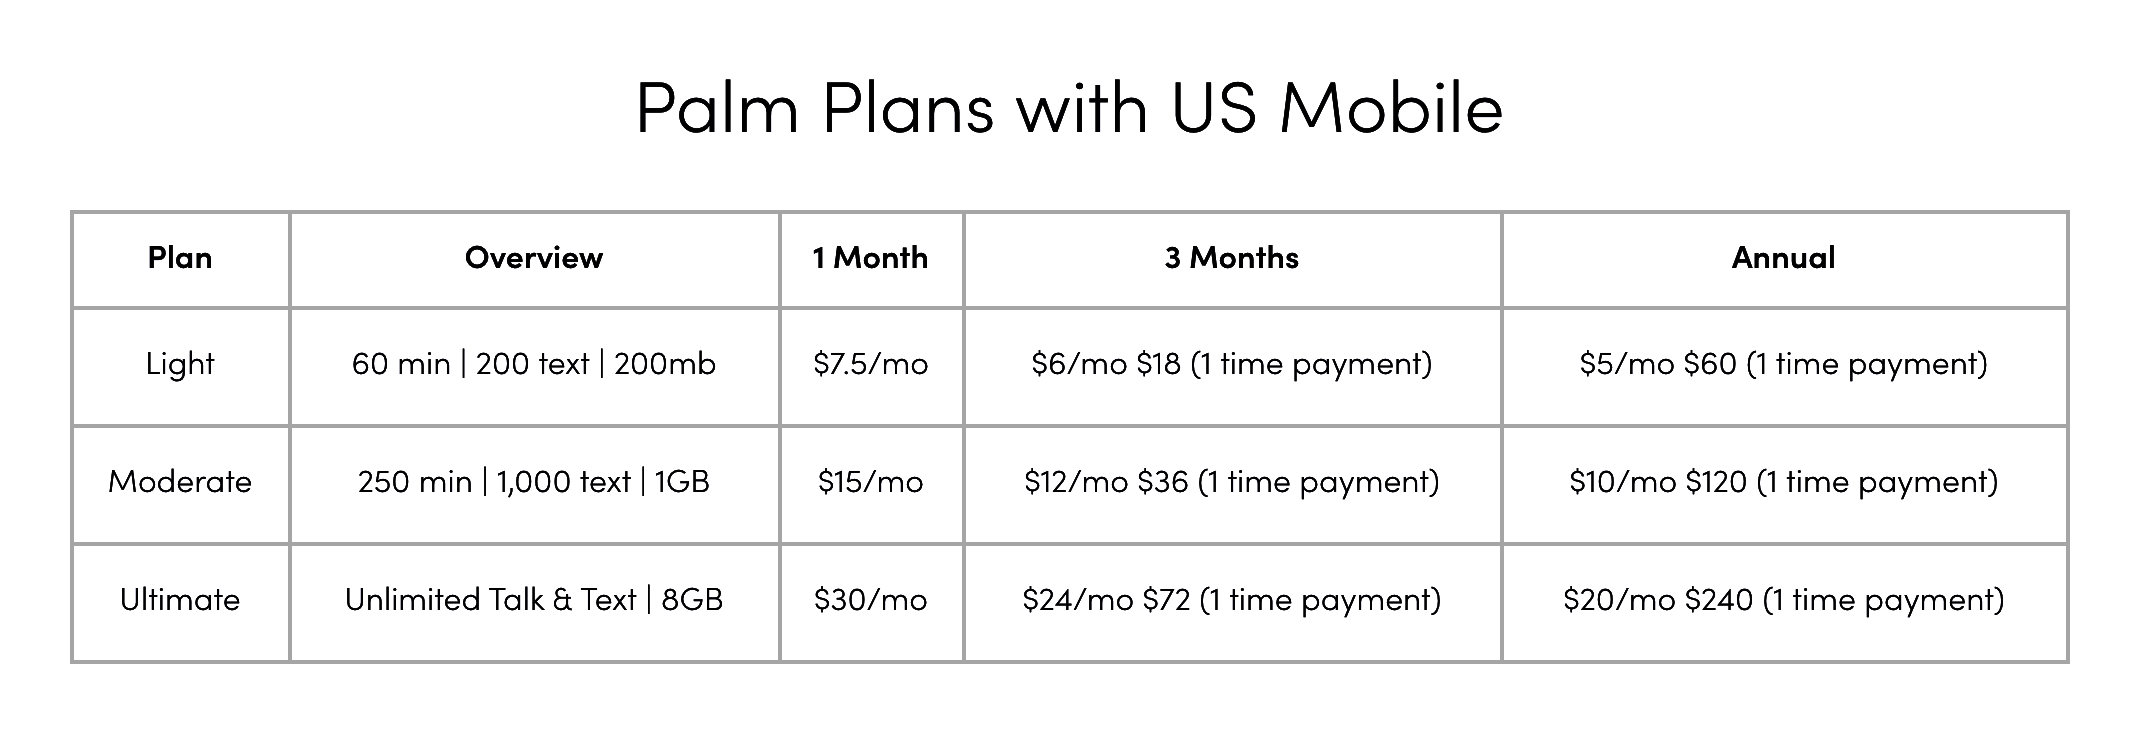 Palm smartphone data plans through US Mobile starting at $5/month